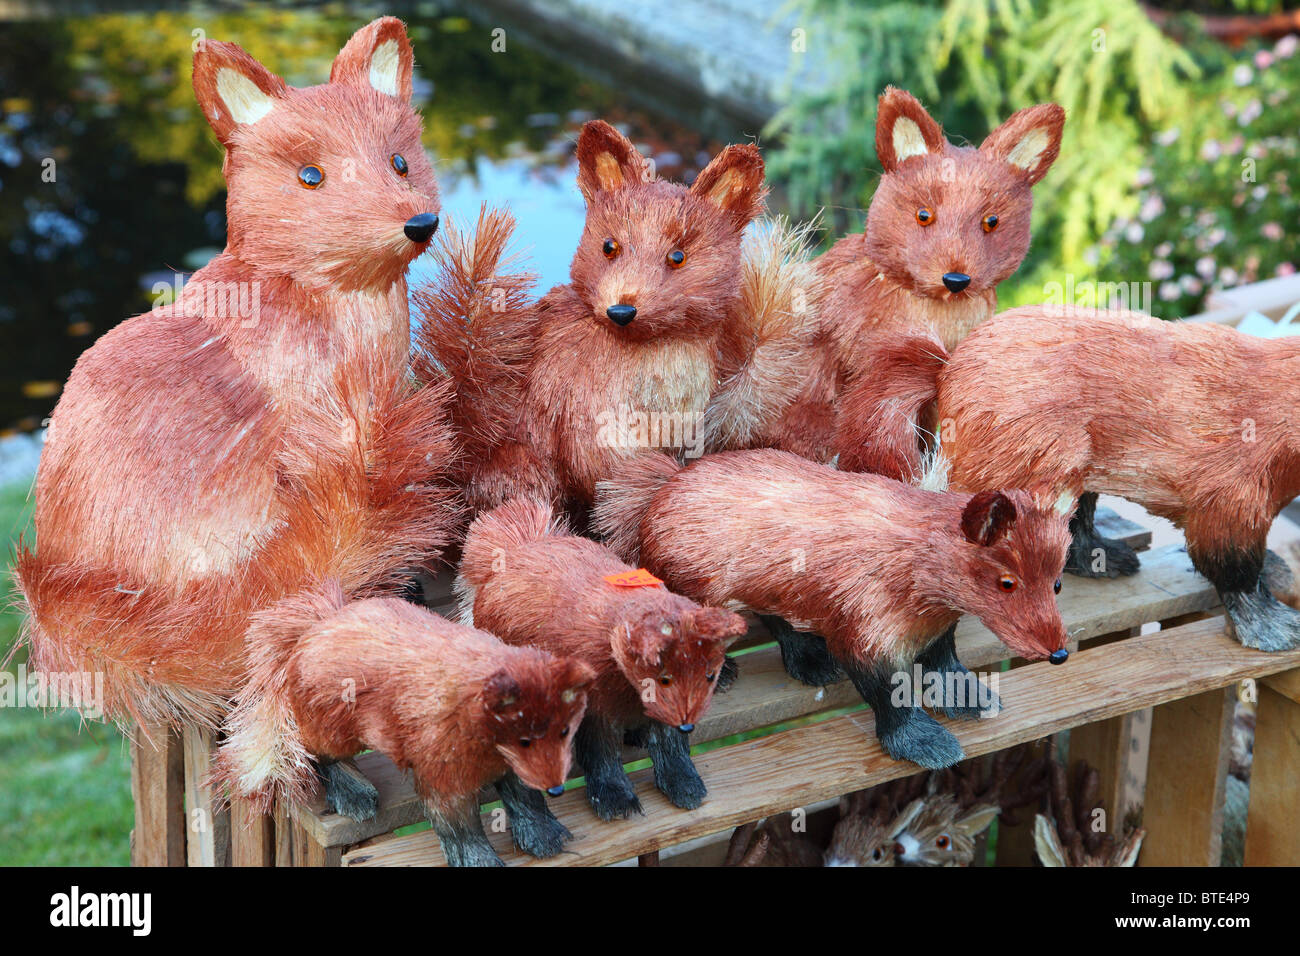 Foxes made of hay handicraft craftsmanship of Poland Stock Photo